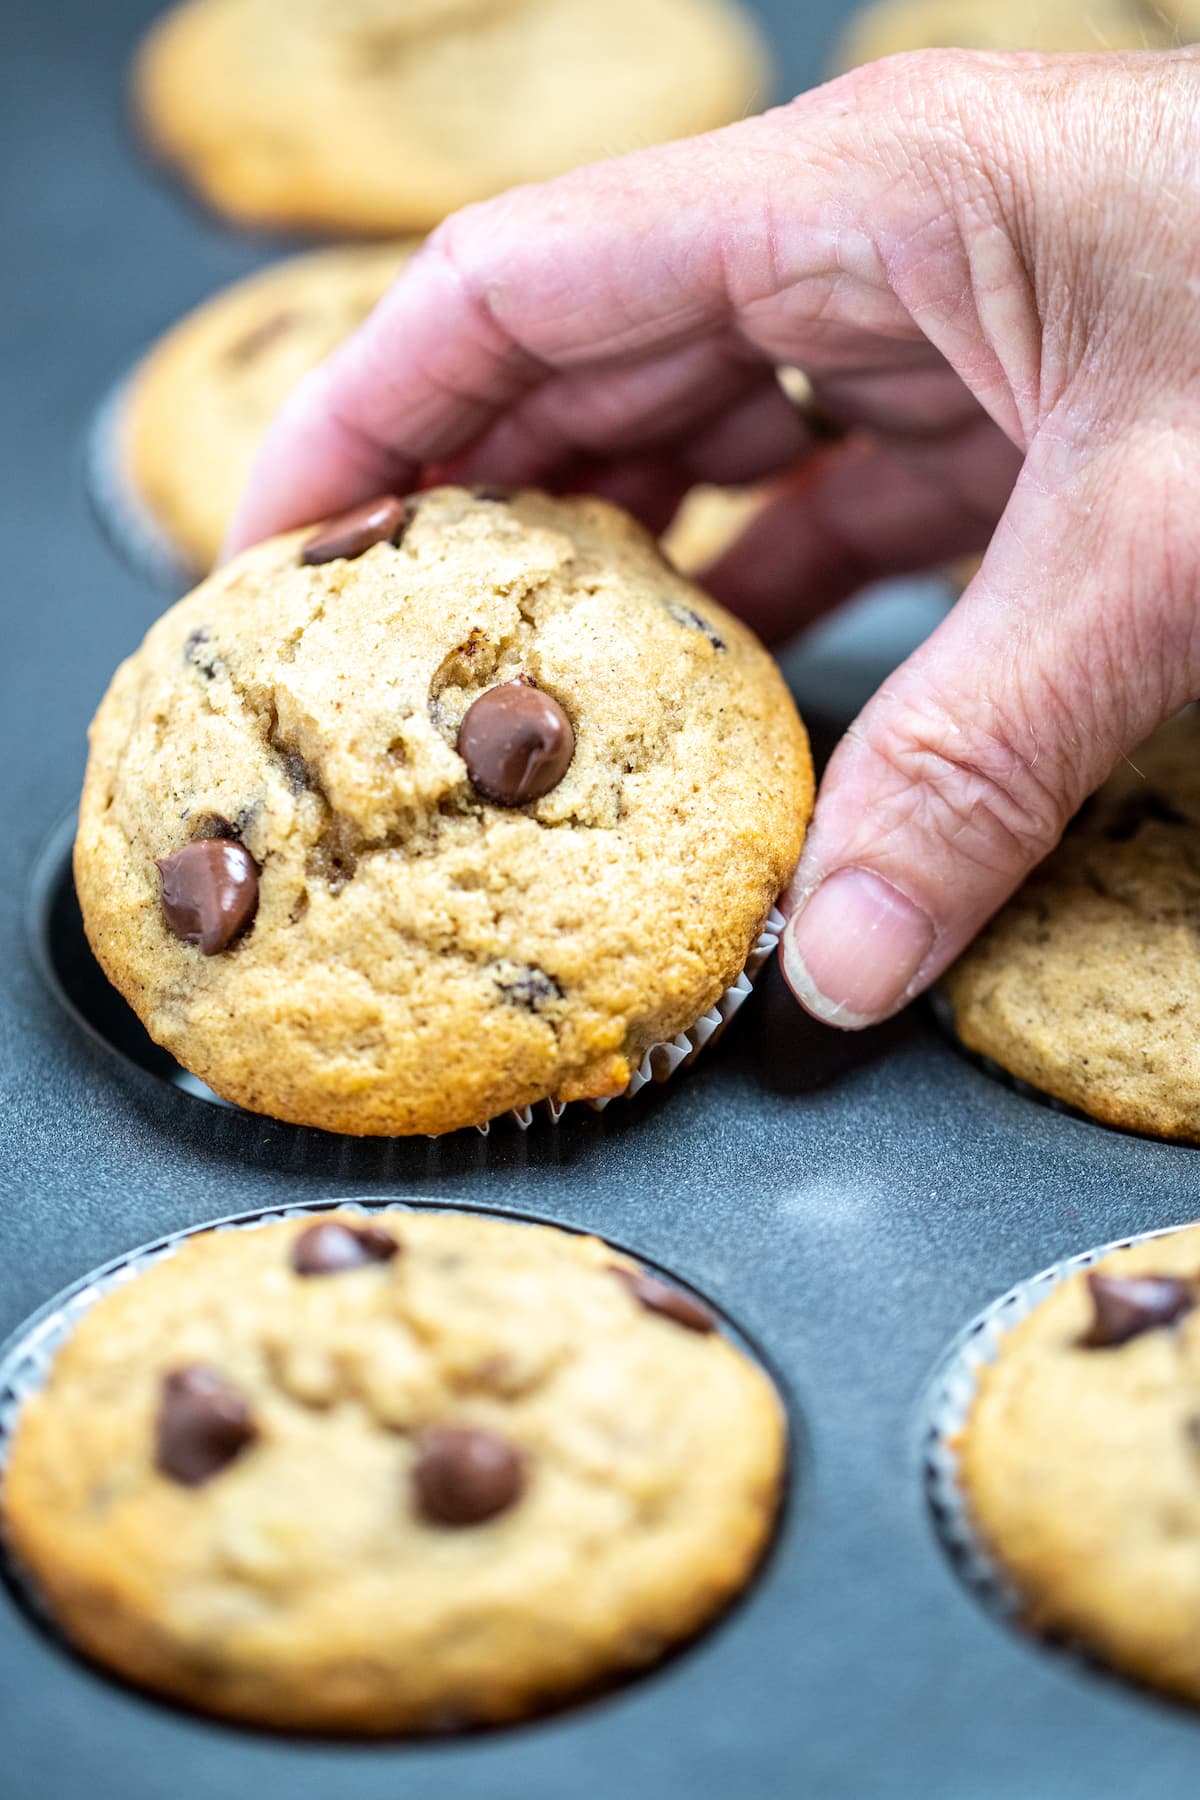 A hand removing a chocolate chip banana muffin from a muffin tin.